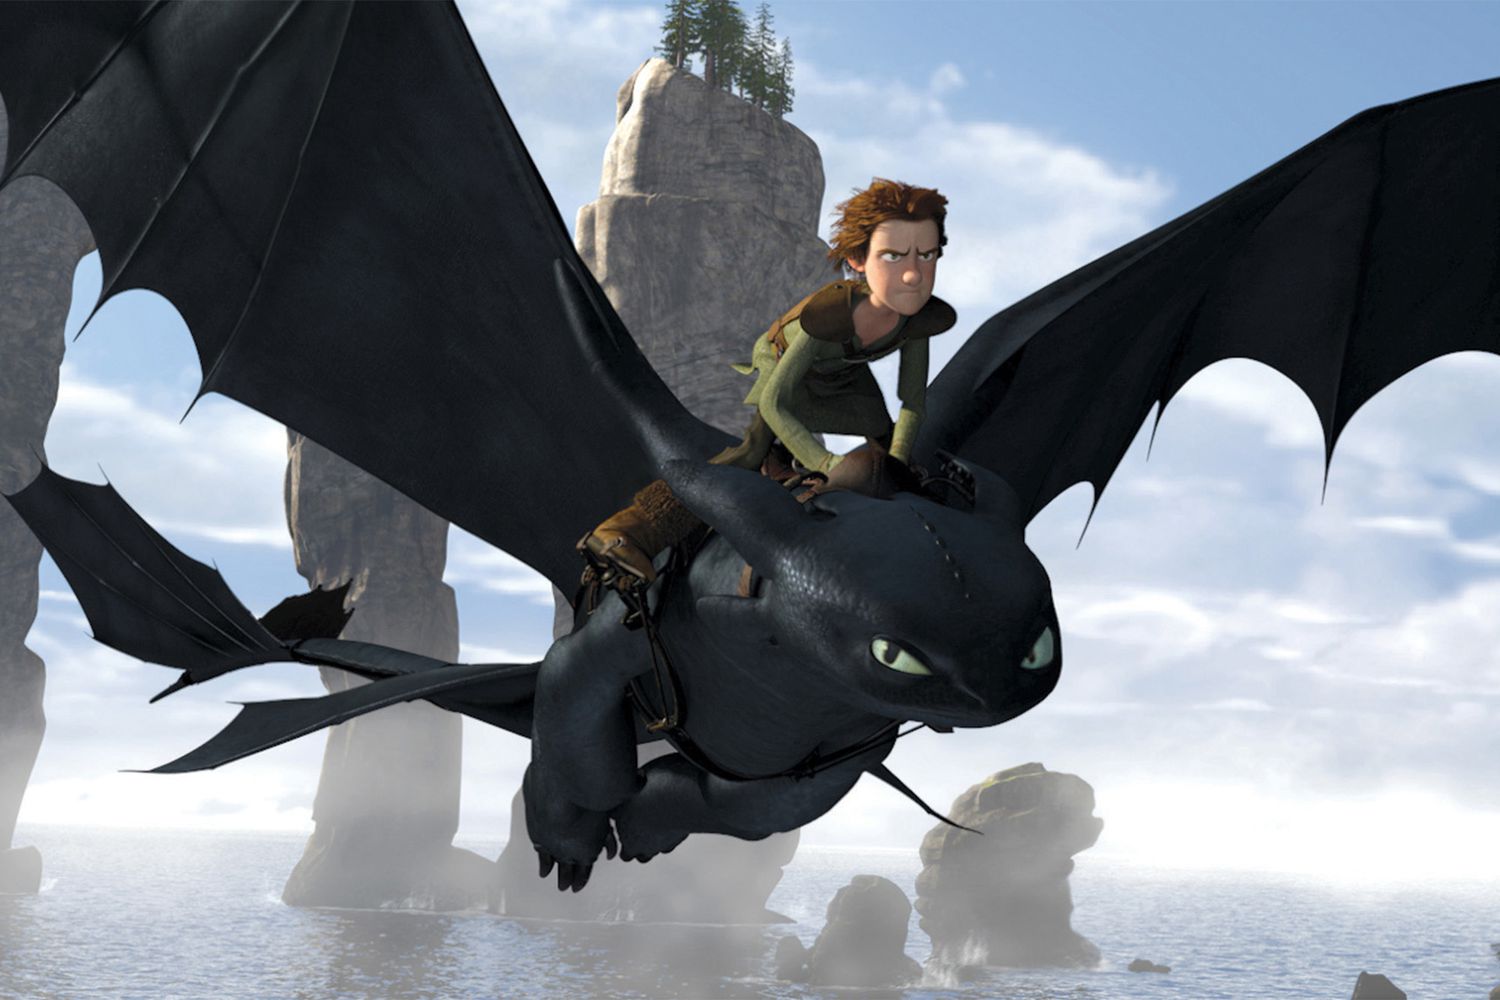 How to Train Your Dragon live-action remake announced 